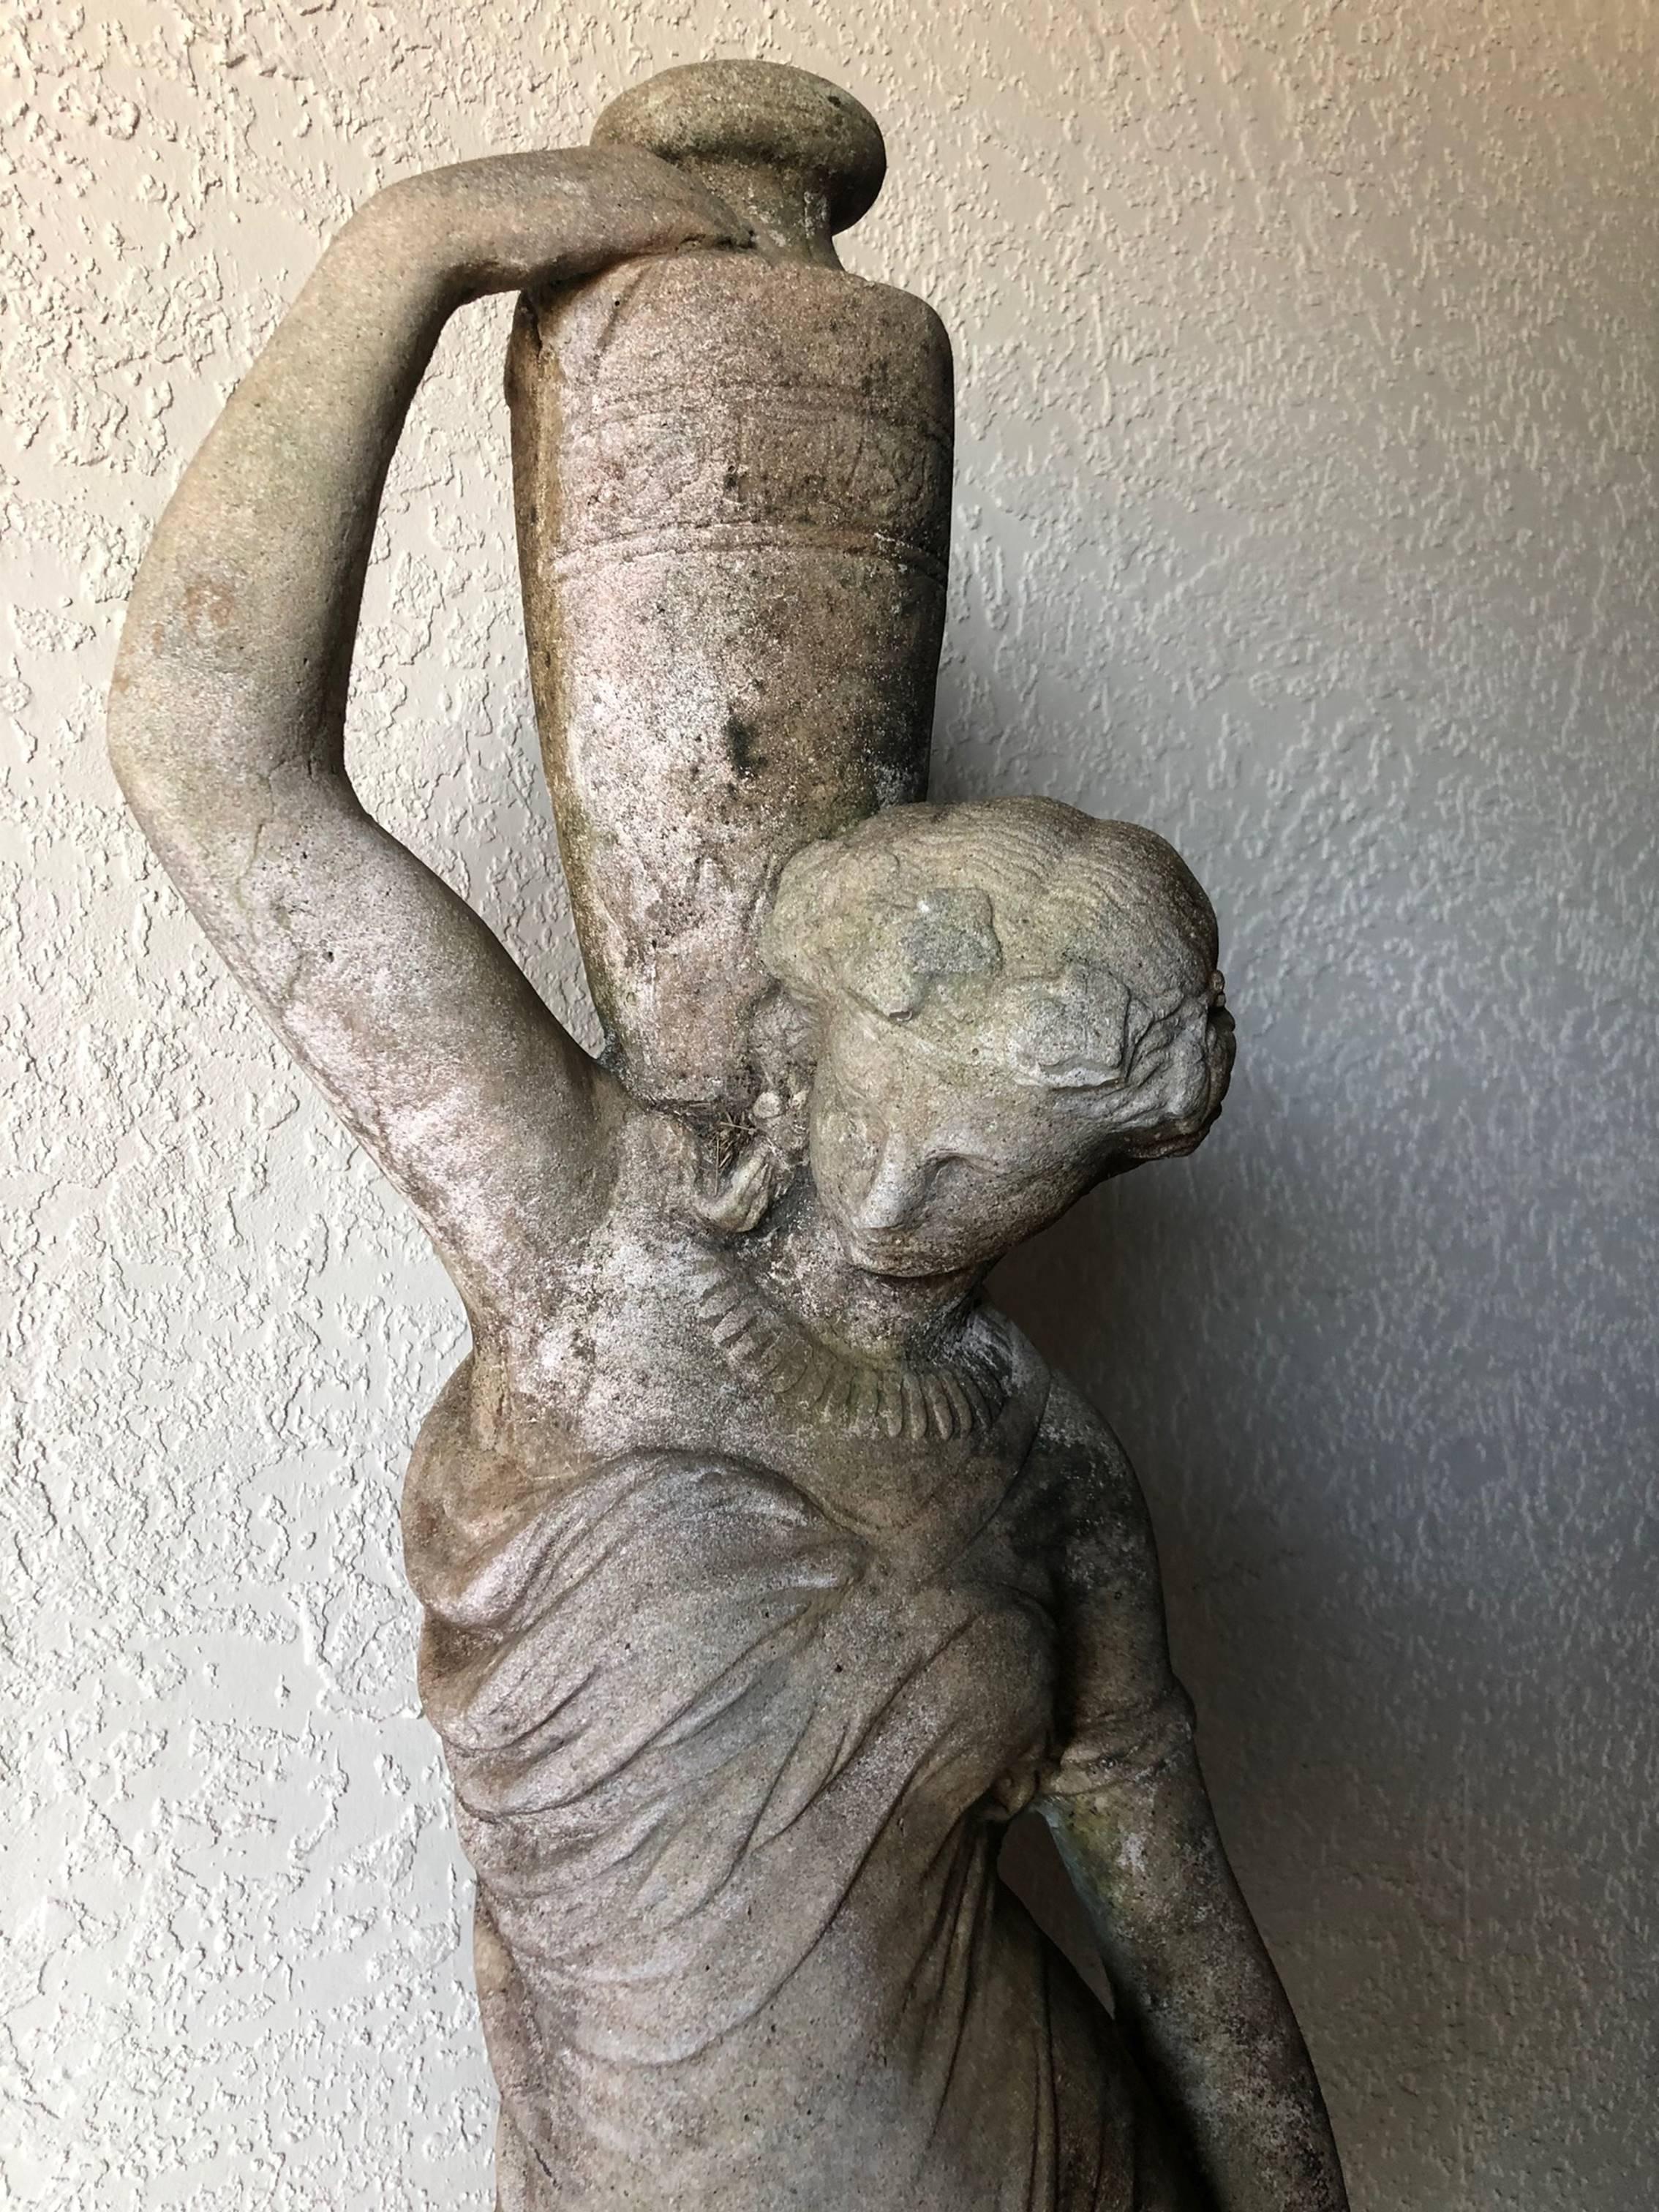 Beautiful refined neoclassical garden figural statue of a woman holding an urn. Main material is stone mixed with gravel and cement. This romantic and majestic statue was at one time a fountain (and can still be if desired). The stone shows sign of